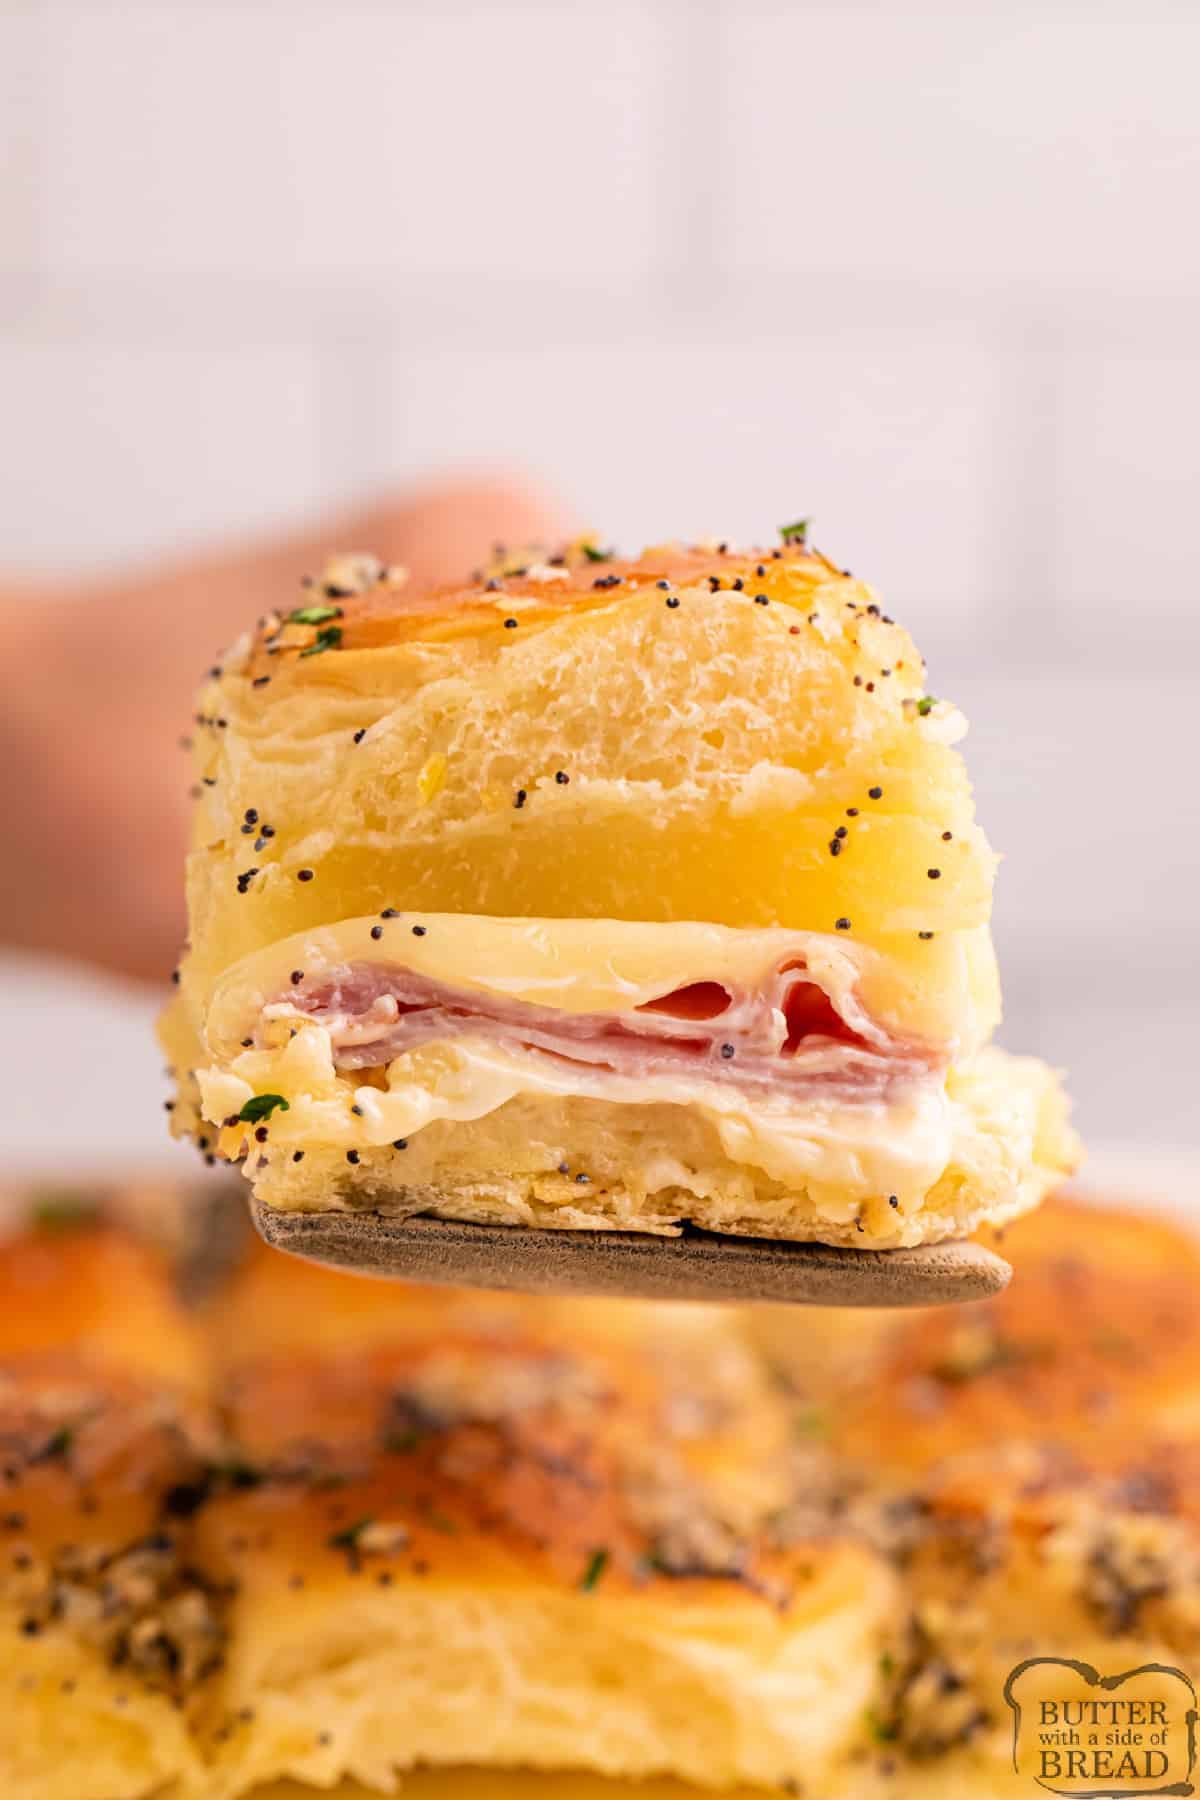 Slider made with pineapple, ham, and cheese. 